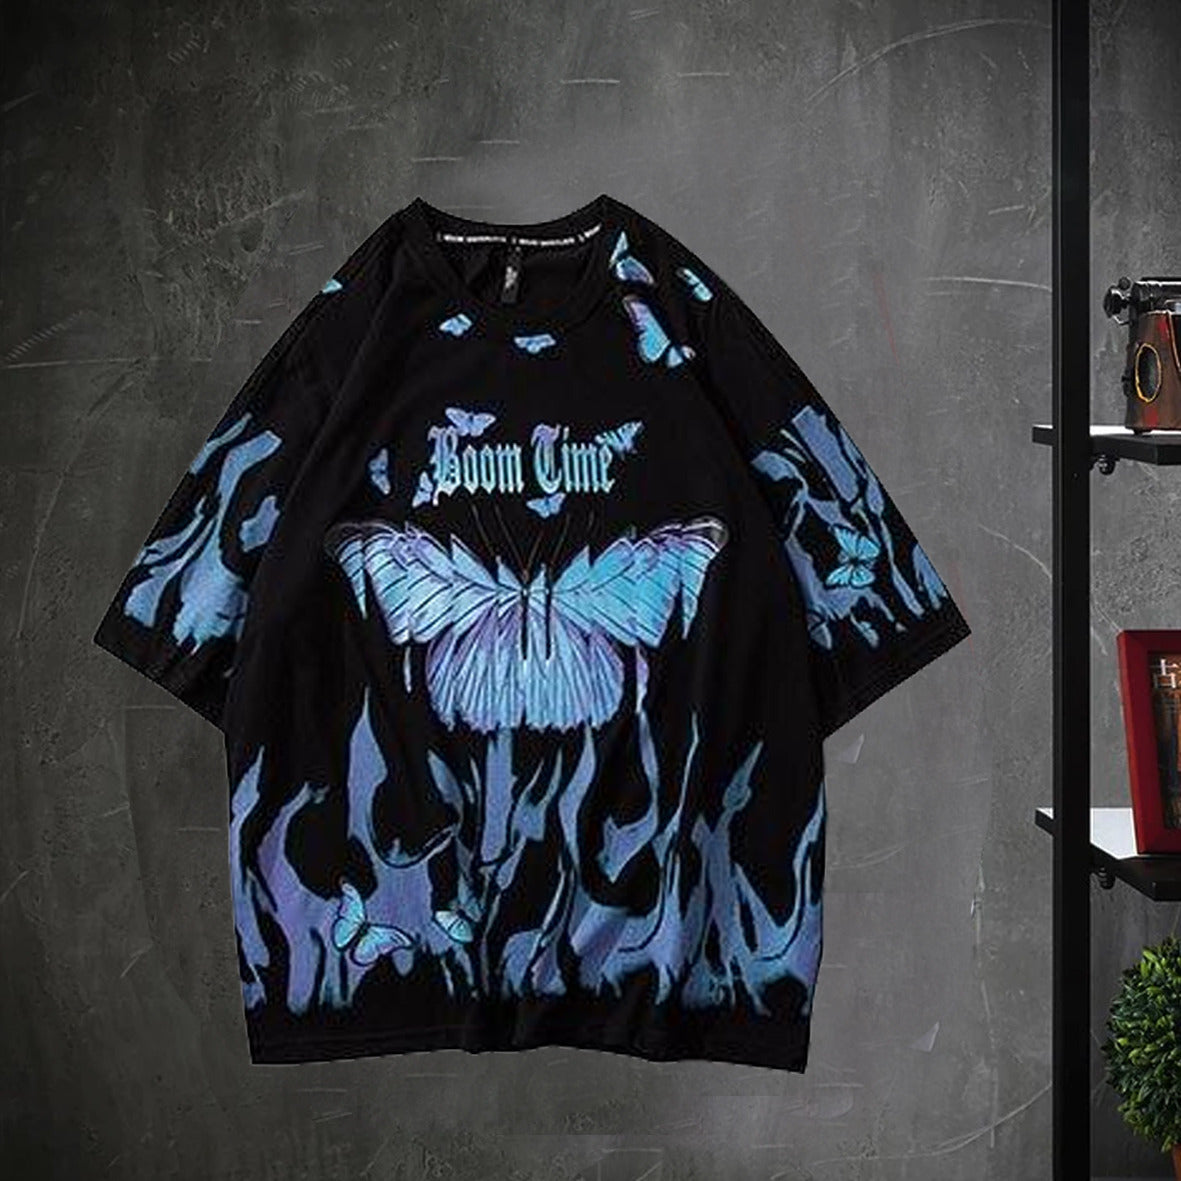 UB "Inferno Butterfly" Tee - Urban Shoes